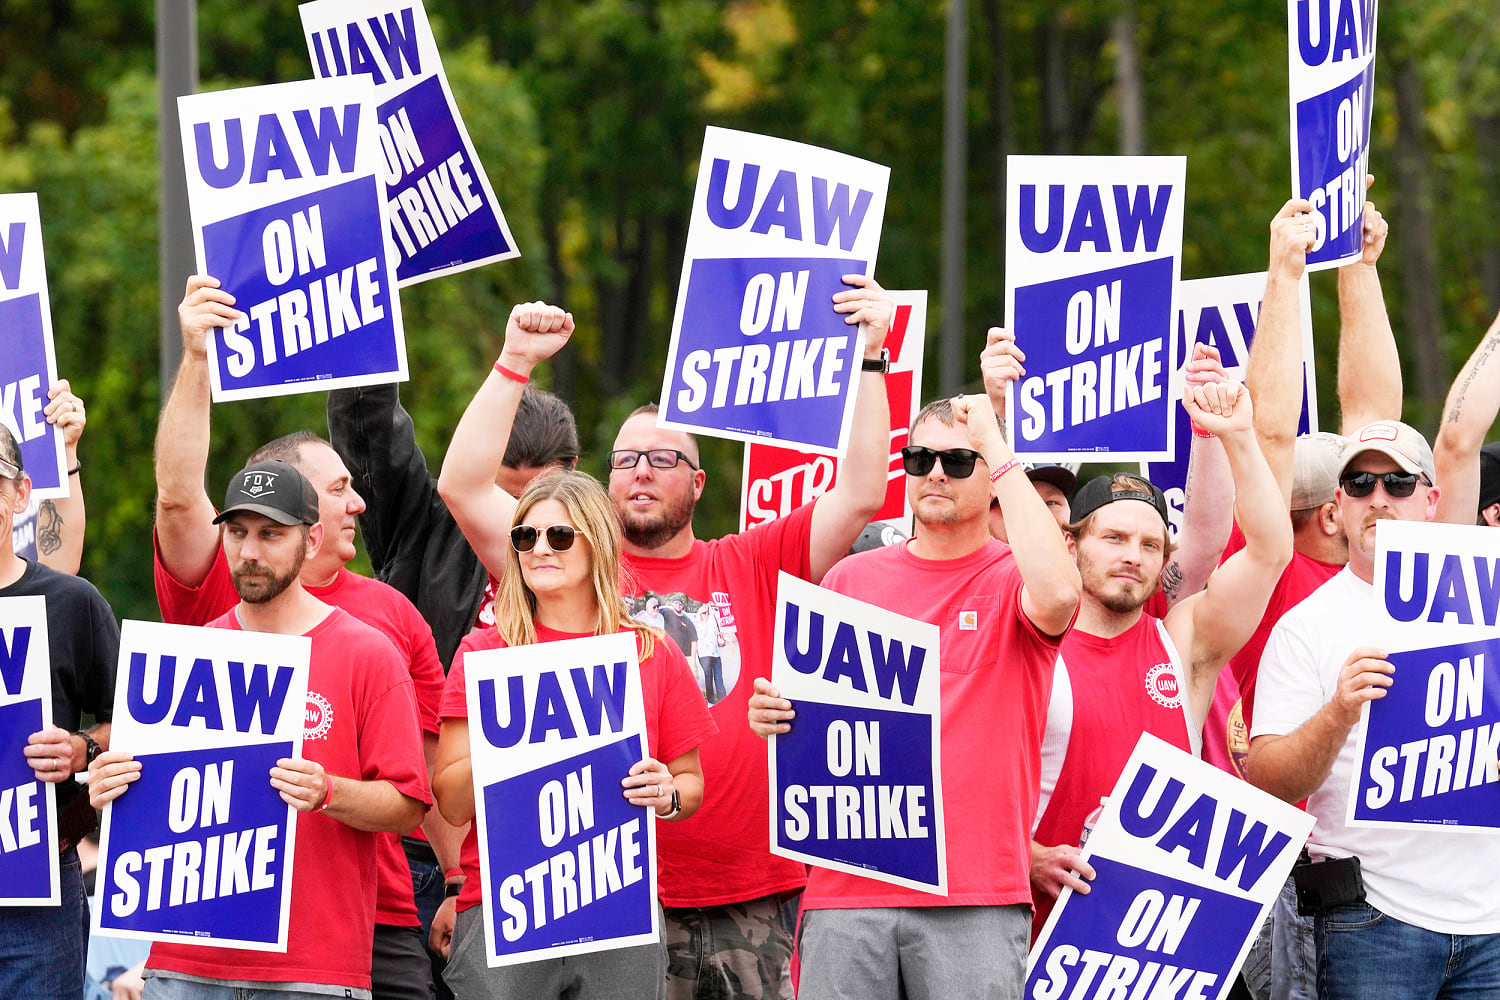 UAW says it’s expanding strike to include major Ford truck plant in Kentucky